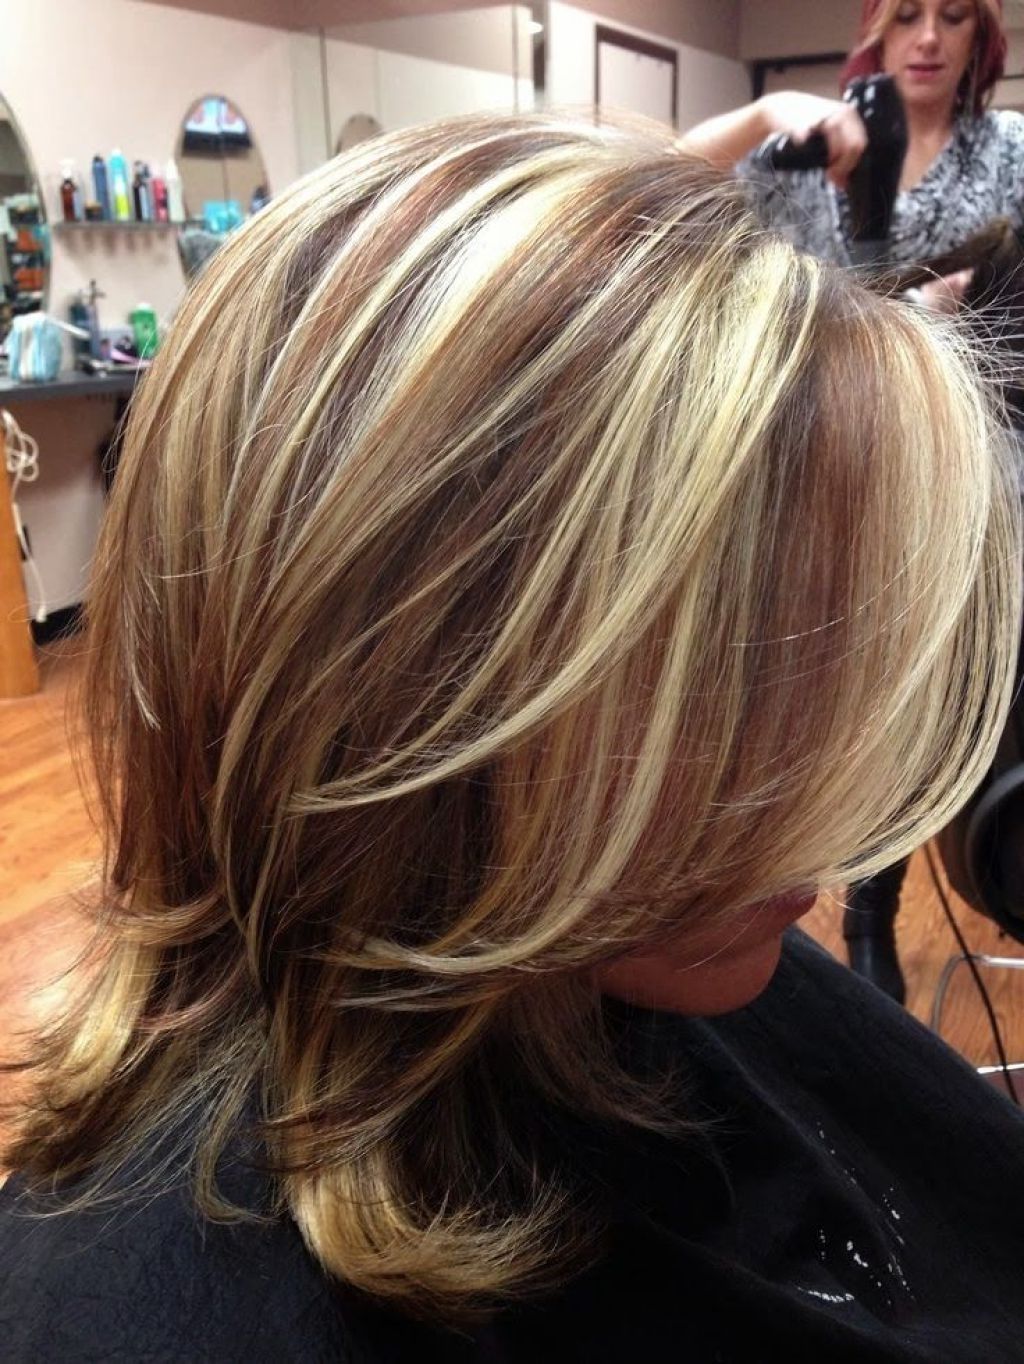 Highlights And Lowlights Ideas 4 Hair Color Highlight And Lowlight Regarding Most Popular Bi Color Blonde With Bangs (View 1 of 20)